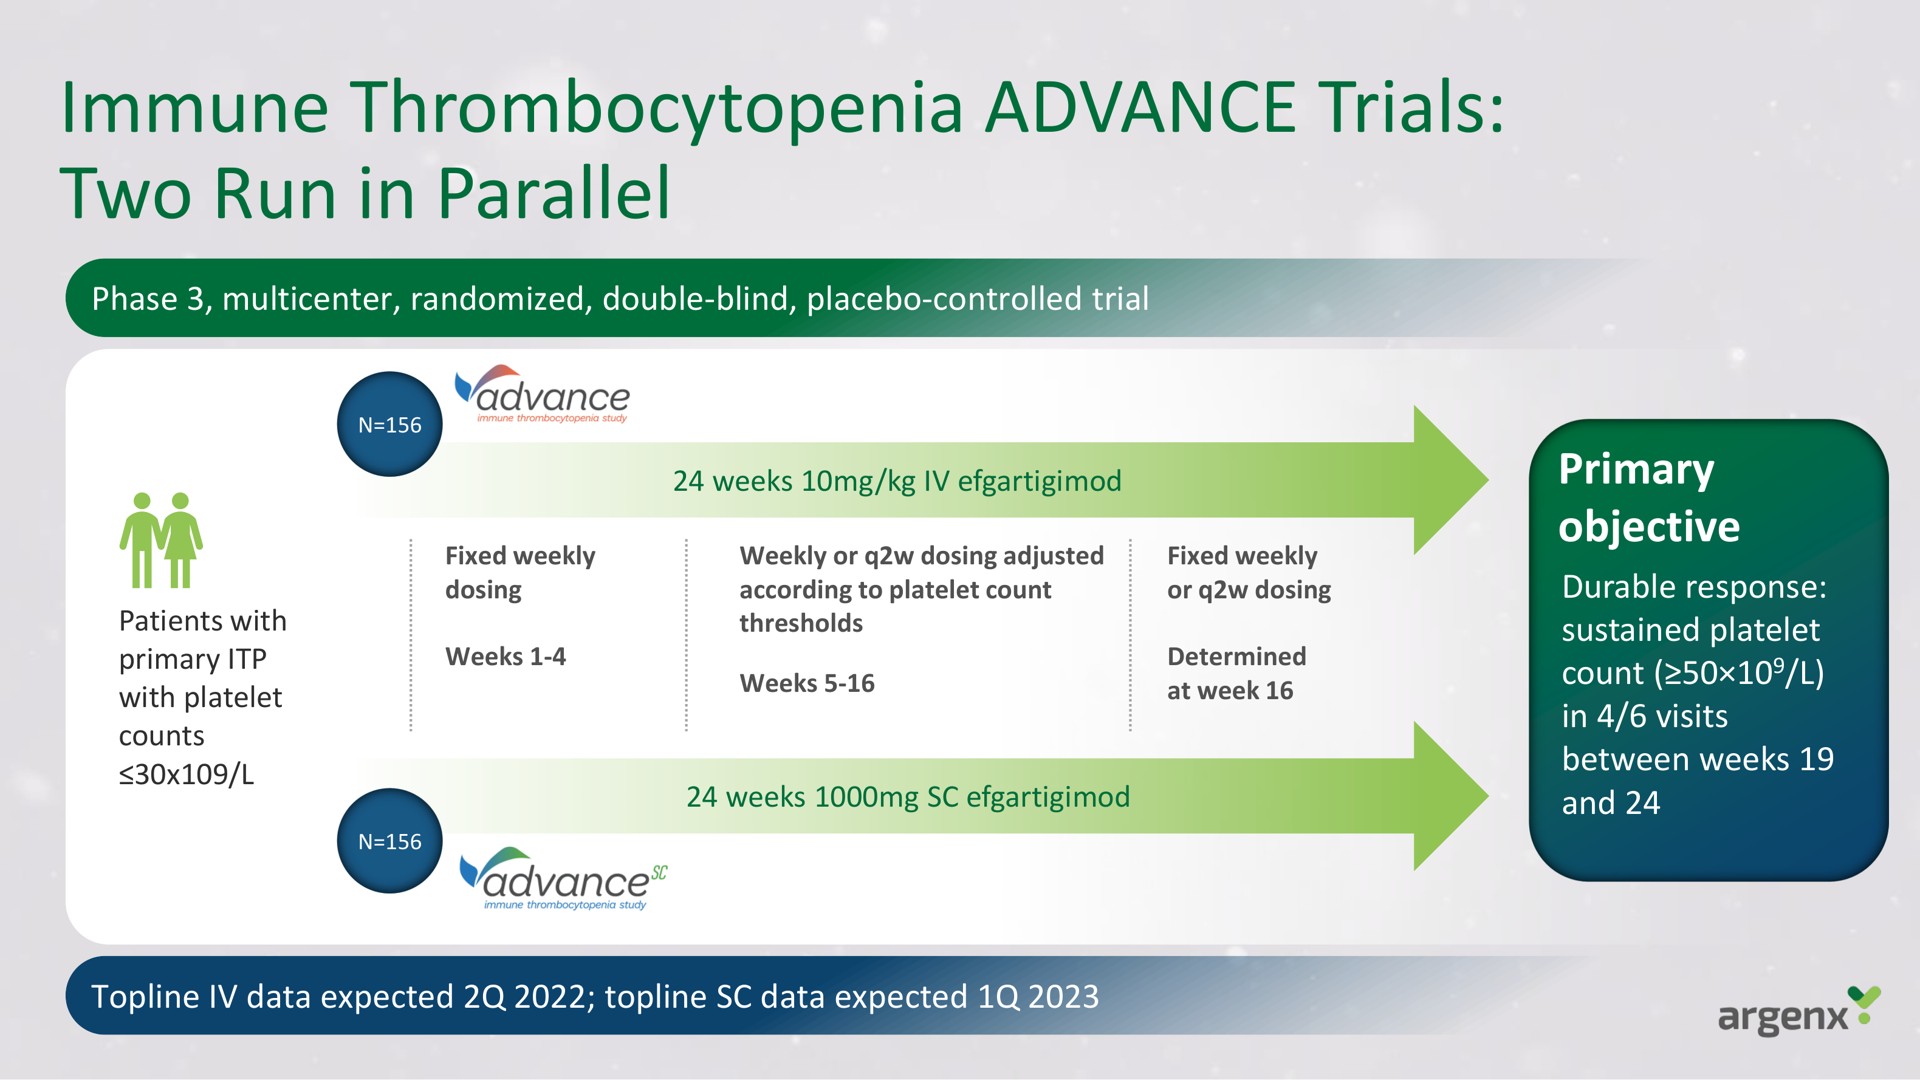 immune thrombocytopenia advance trials two run in parallel and | argenx SE